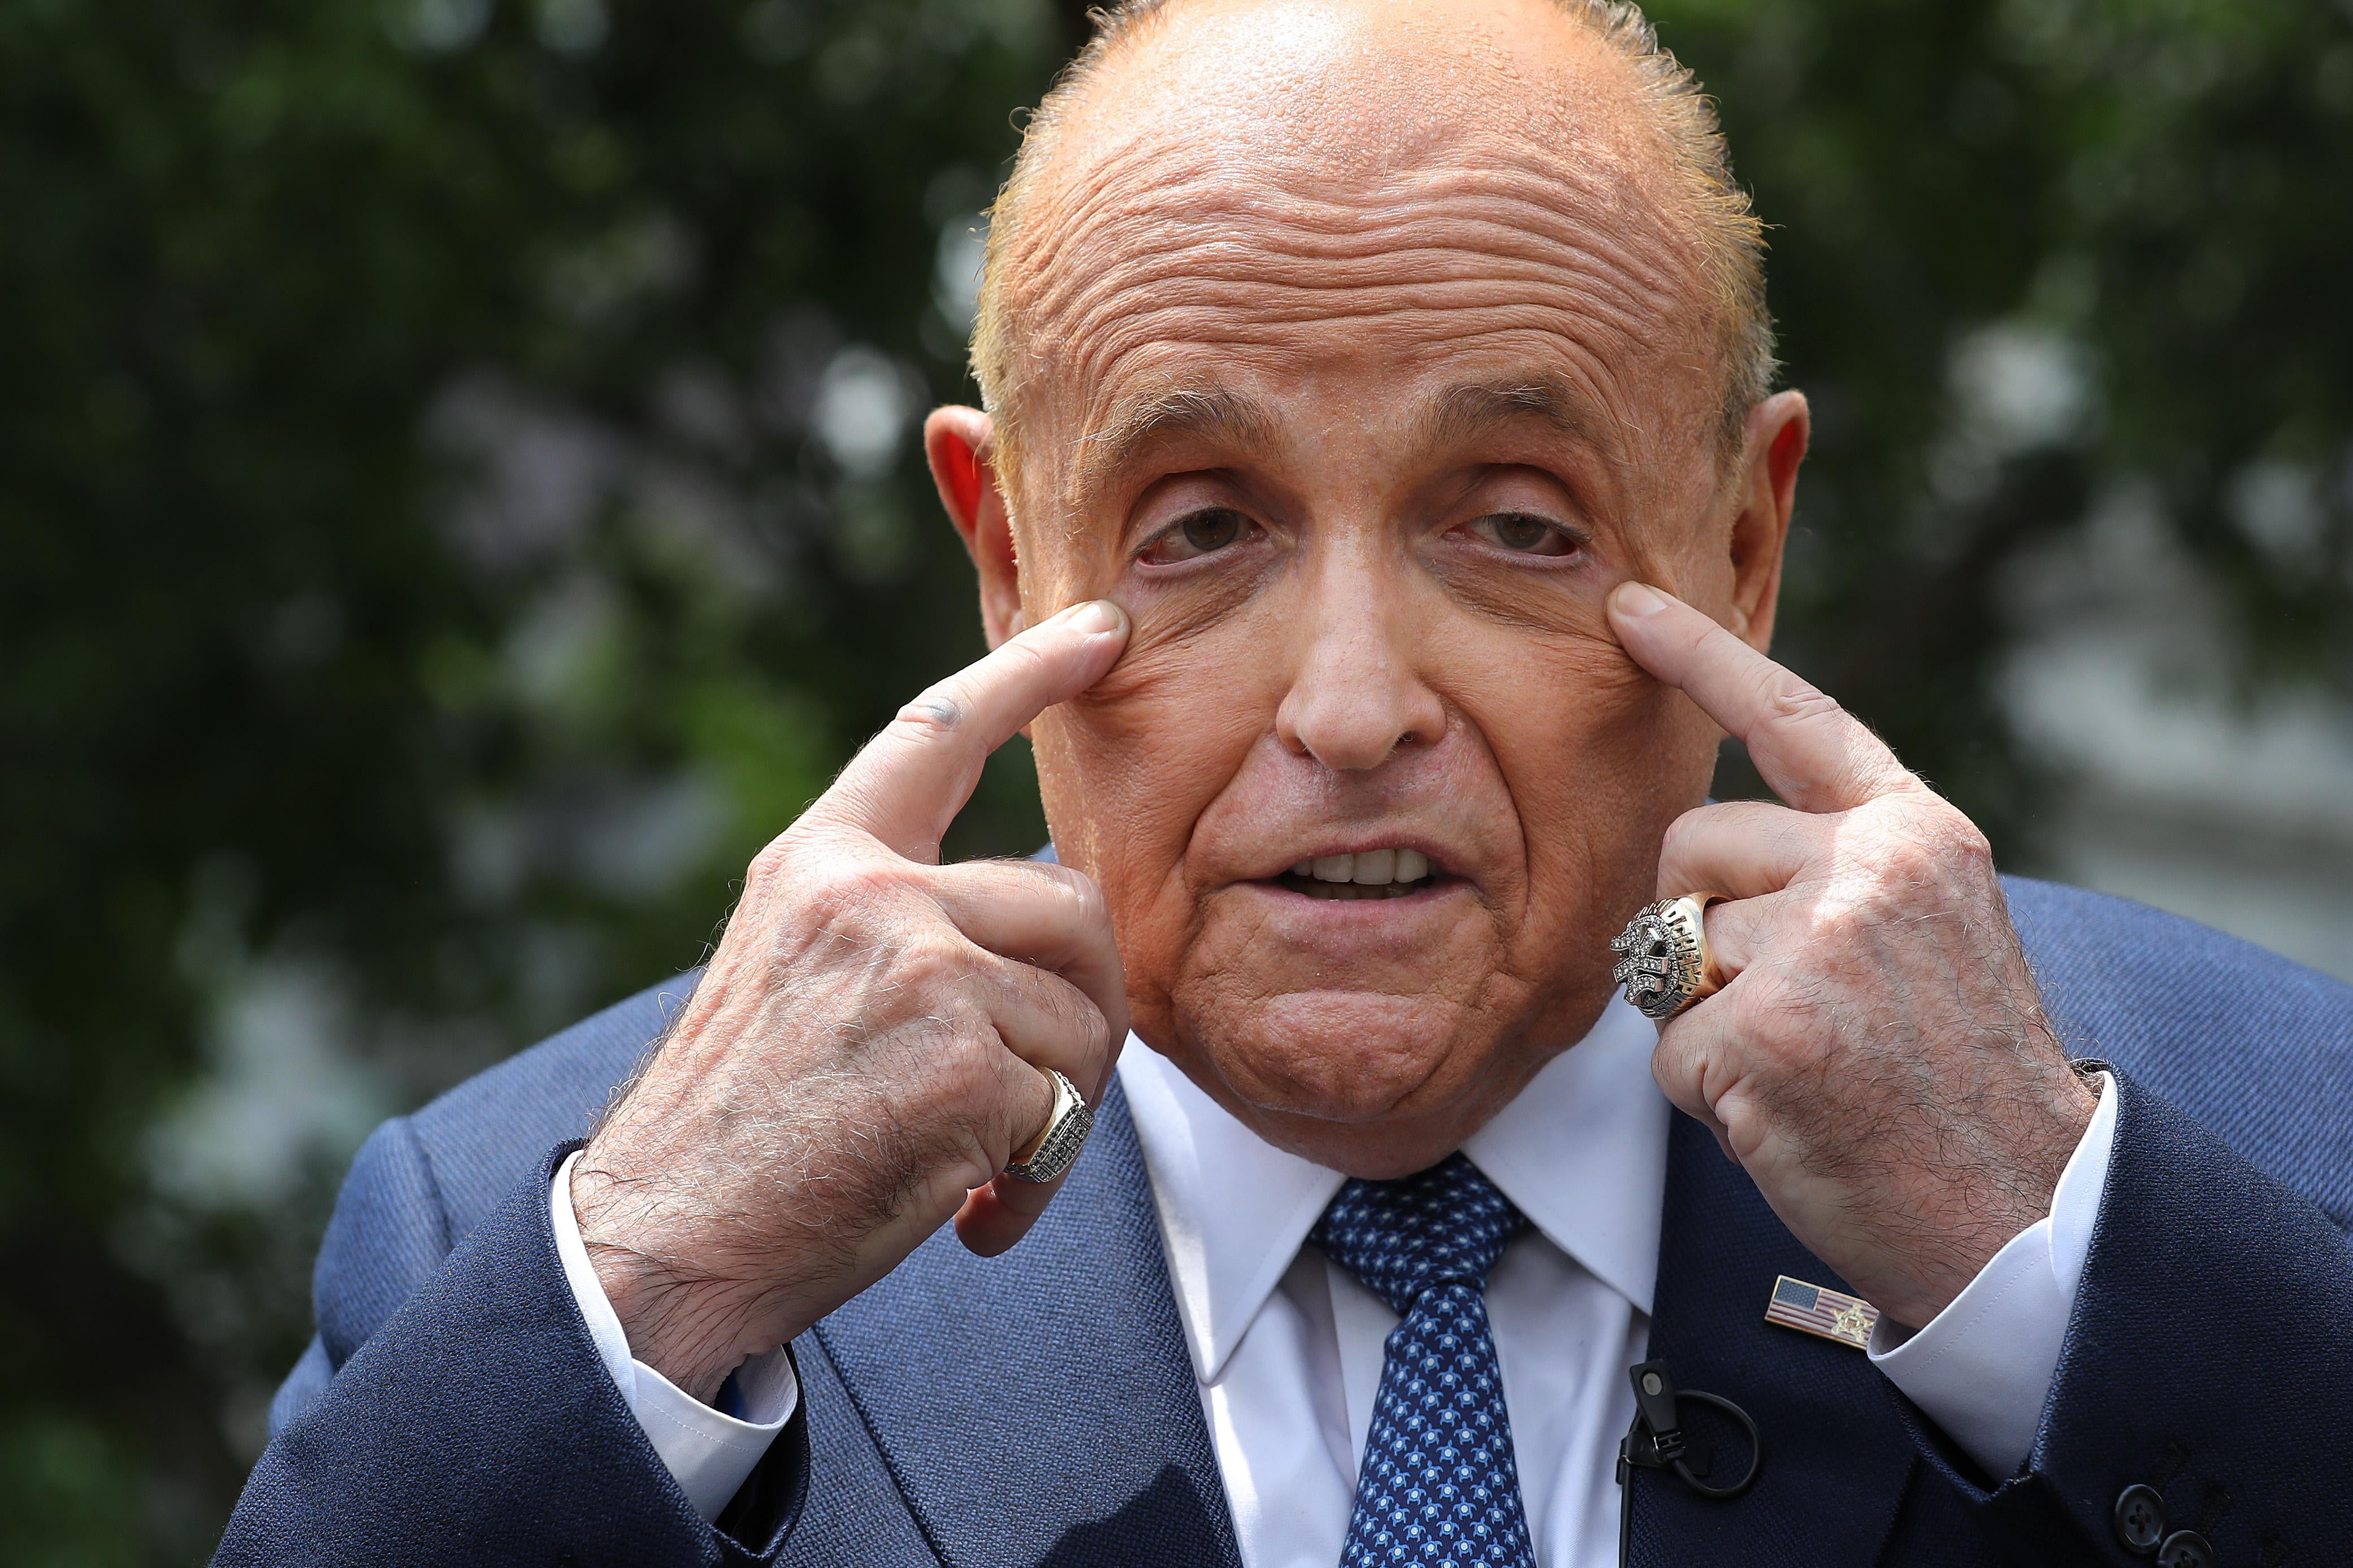 Former New York City Mayor Rudy Giuliani pulling at his eyes with his hands as he talks to journalists outside the White House West Wing July 01, 2020 in Washington, DC.